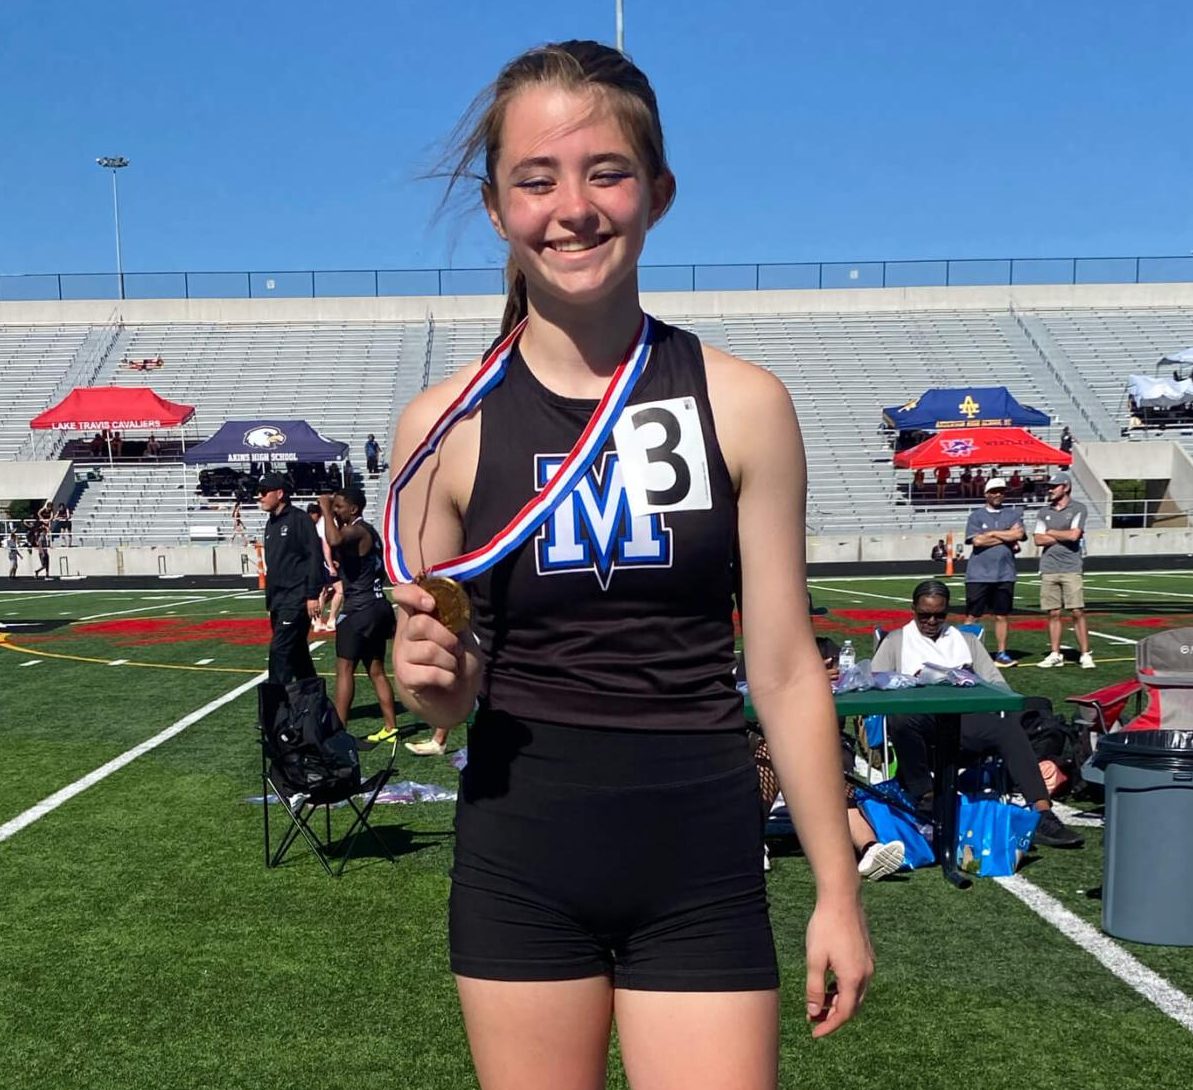 At the UIL 24-5A District Championship at Burger Stadium on April 2-4, sophomore Cheezey Bell took third in the 100-meter dash, running 13.49.  The result helped the girls team win the district title.